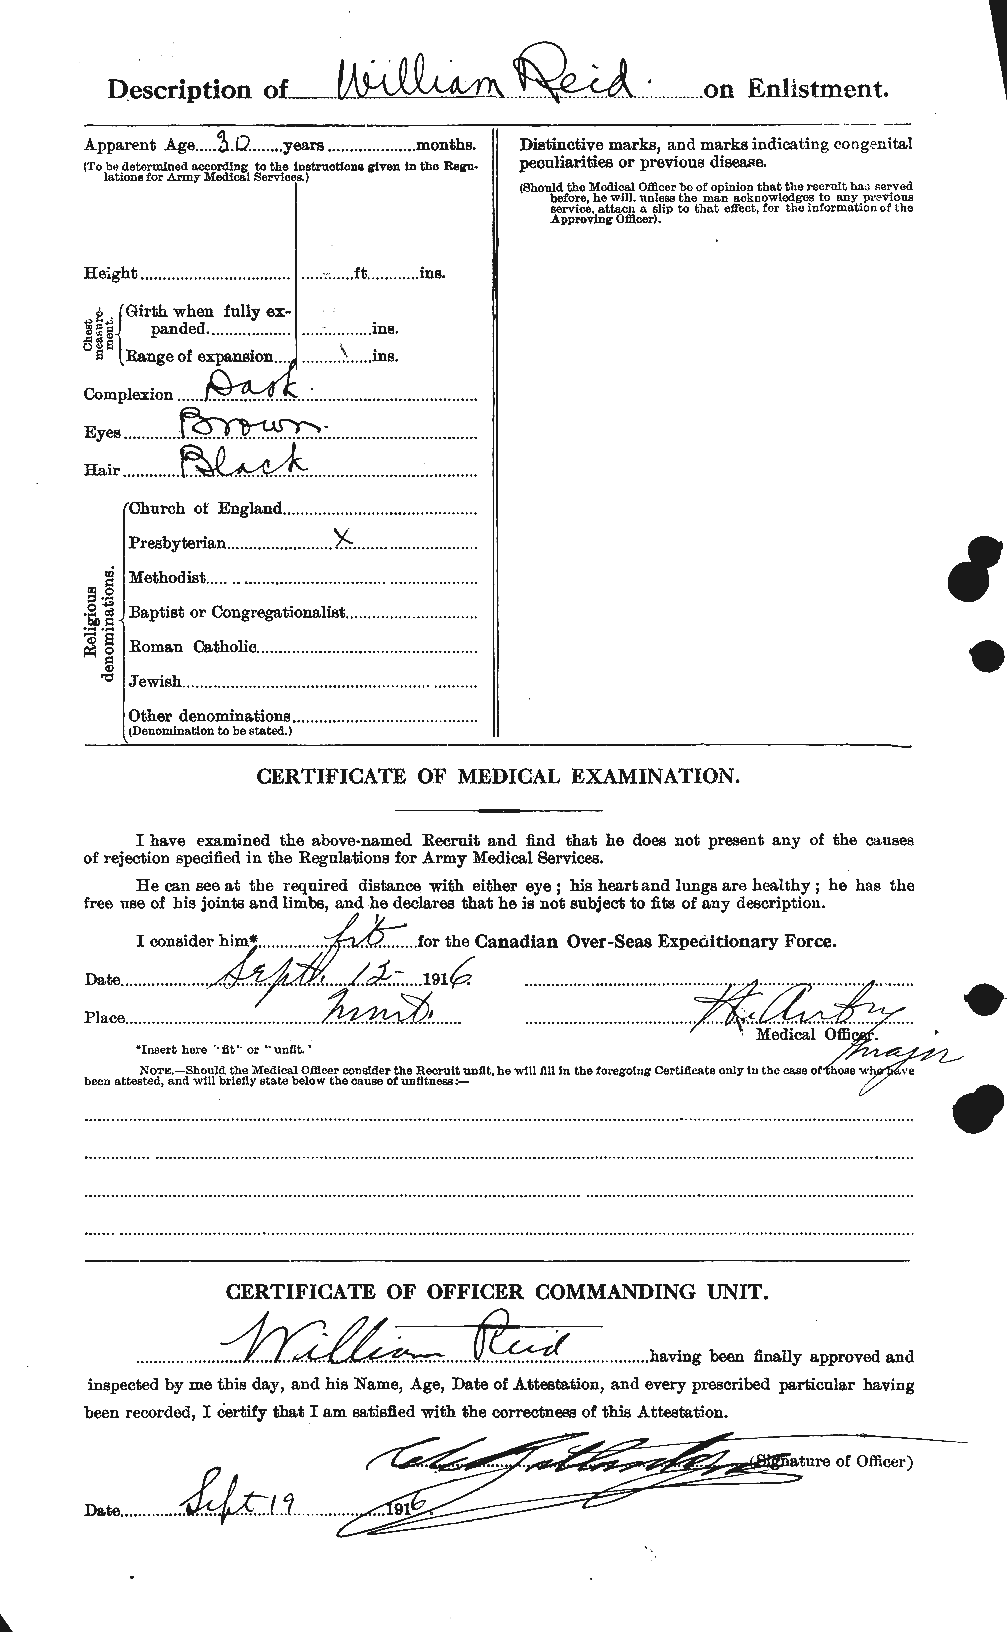 Personnel Records of the First World War - CEF 596932b